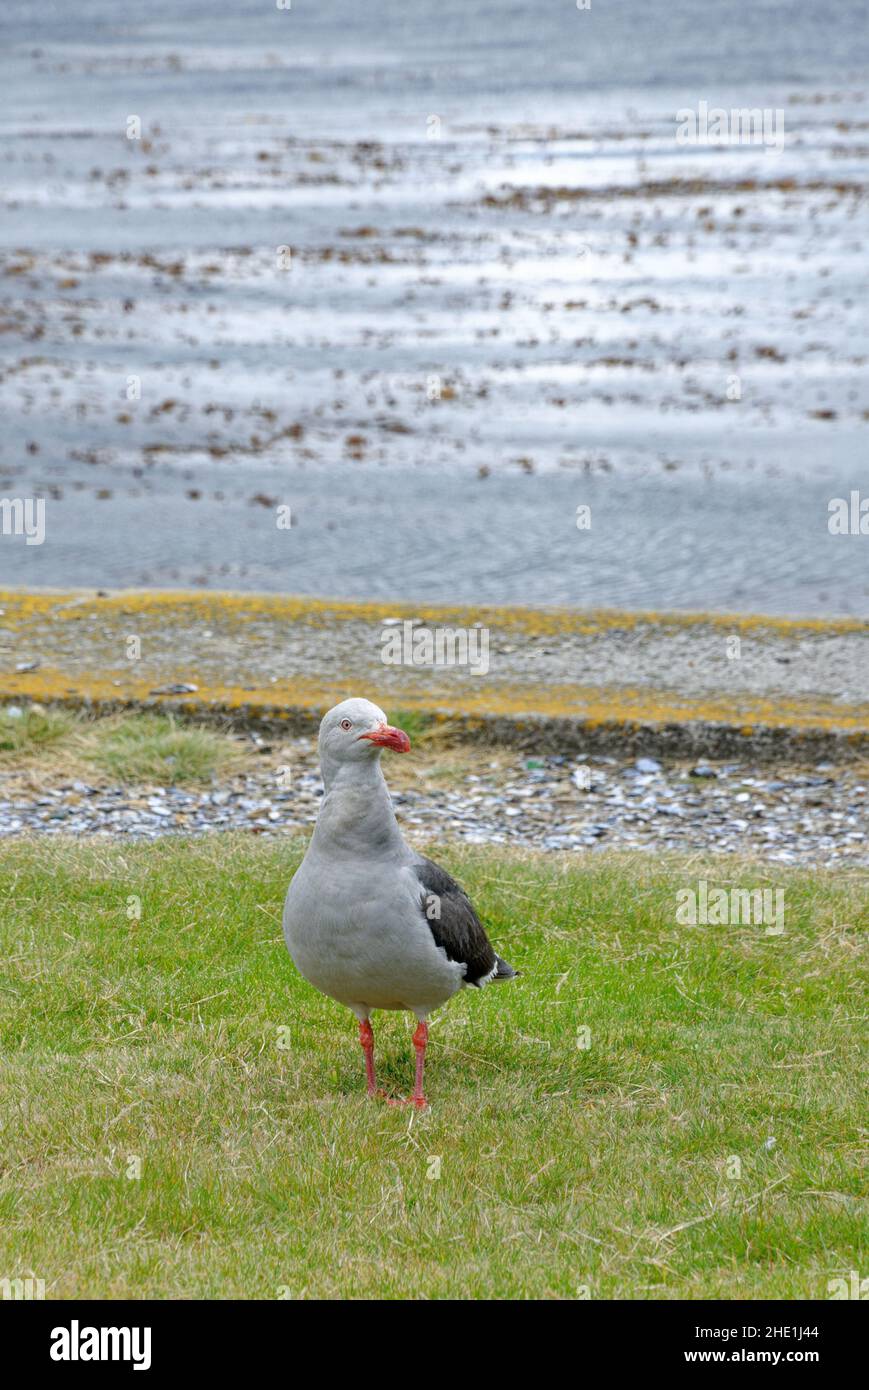 Dolphin Gull, Larus scoresbii is smaller gull. Dolphin gulls in Port Stanley - Falkland Islands -28th of February 2014 Stock Photo